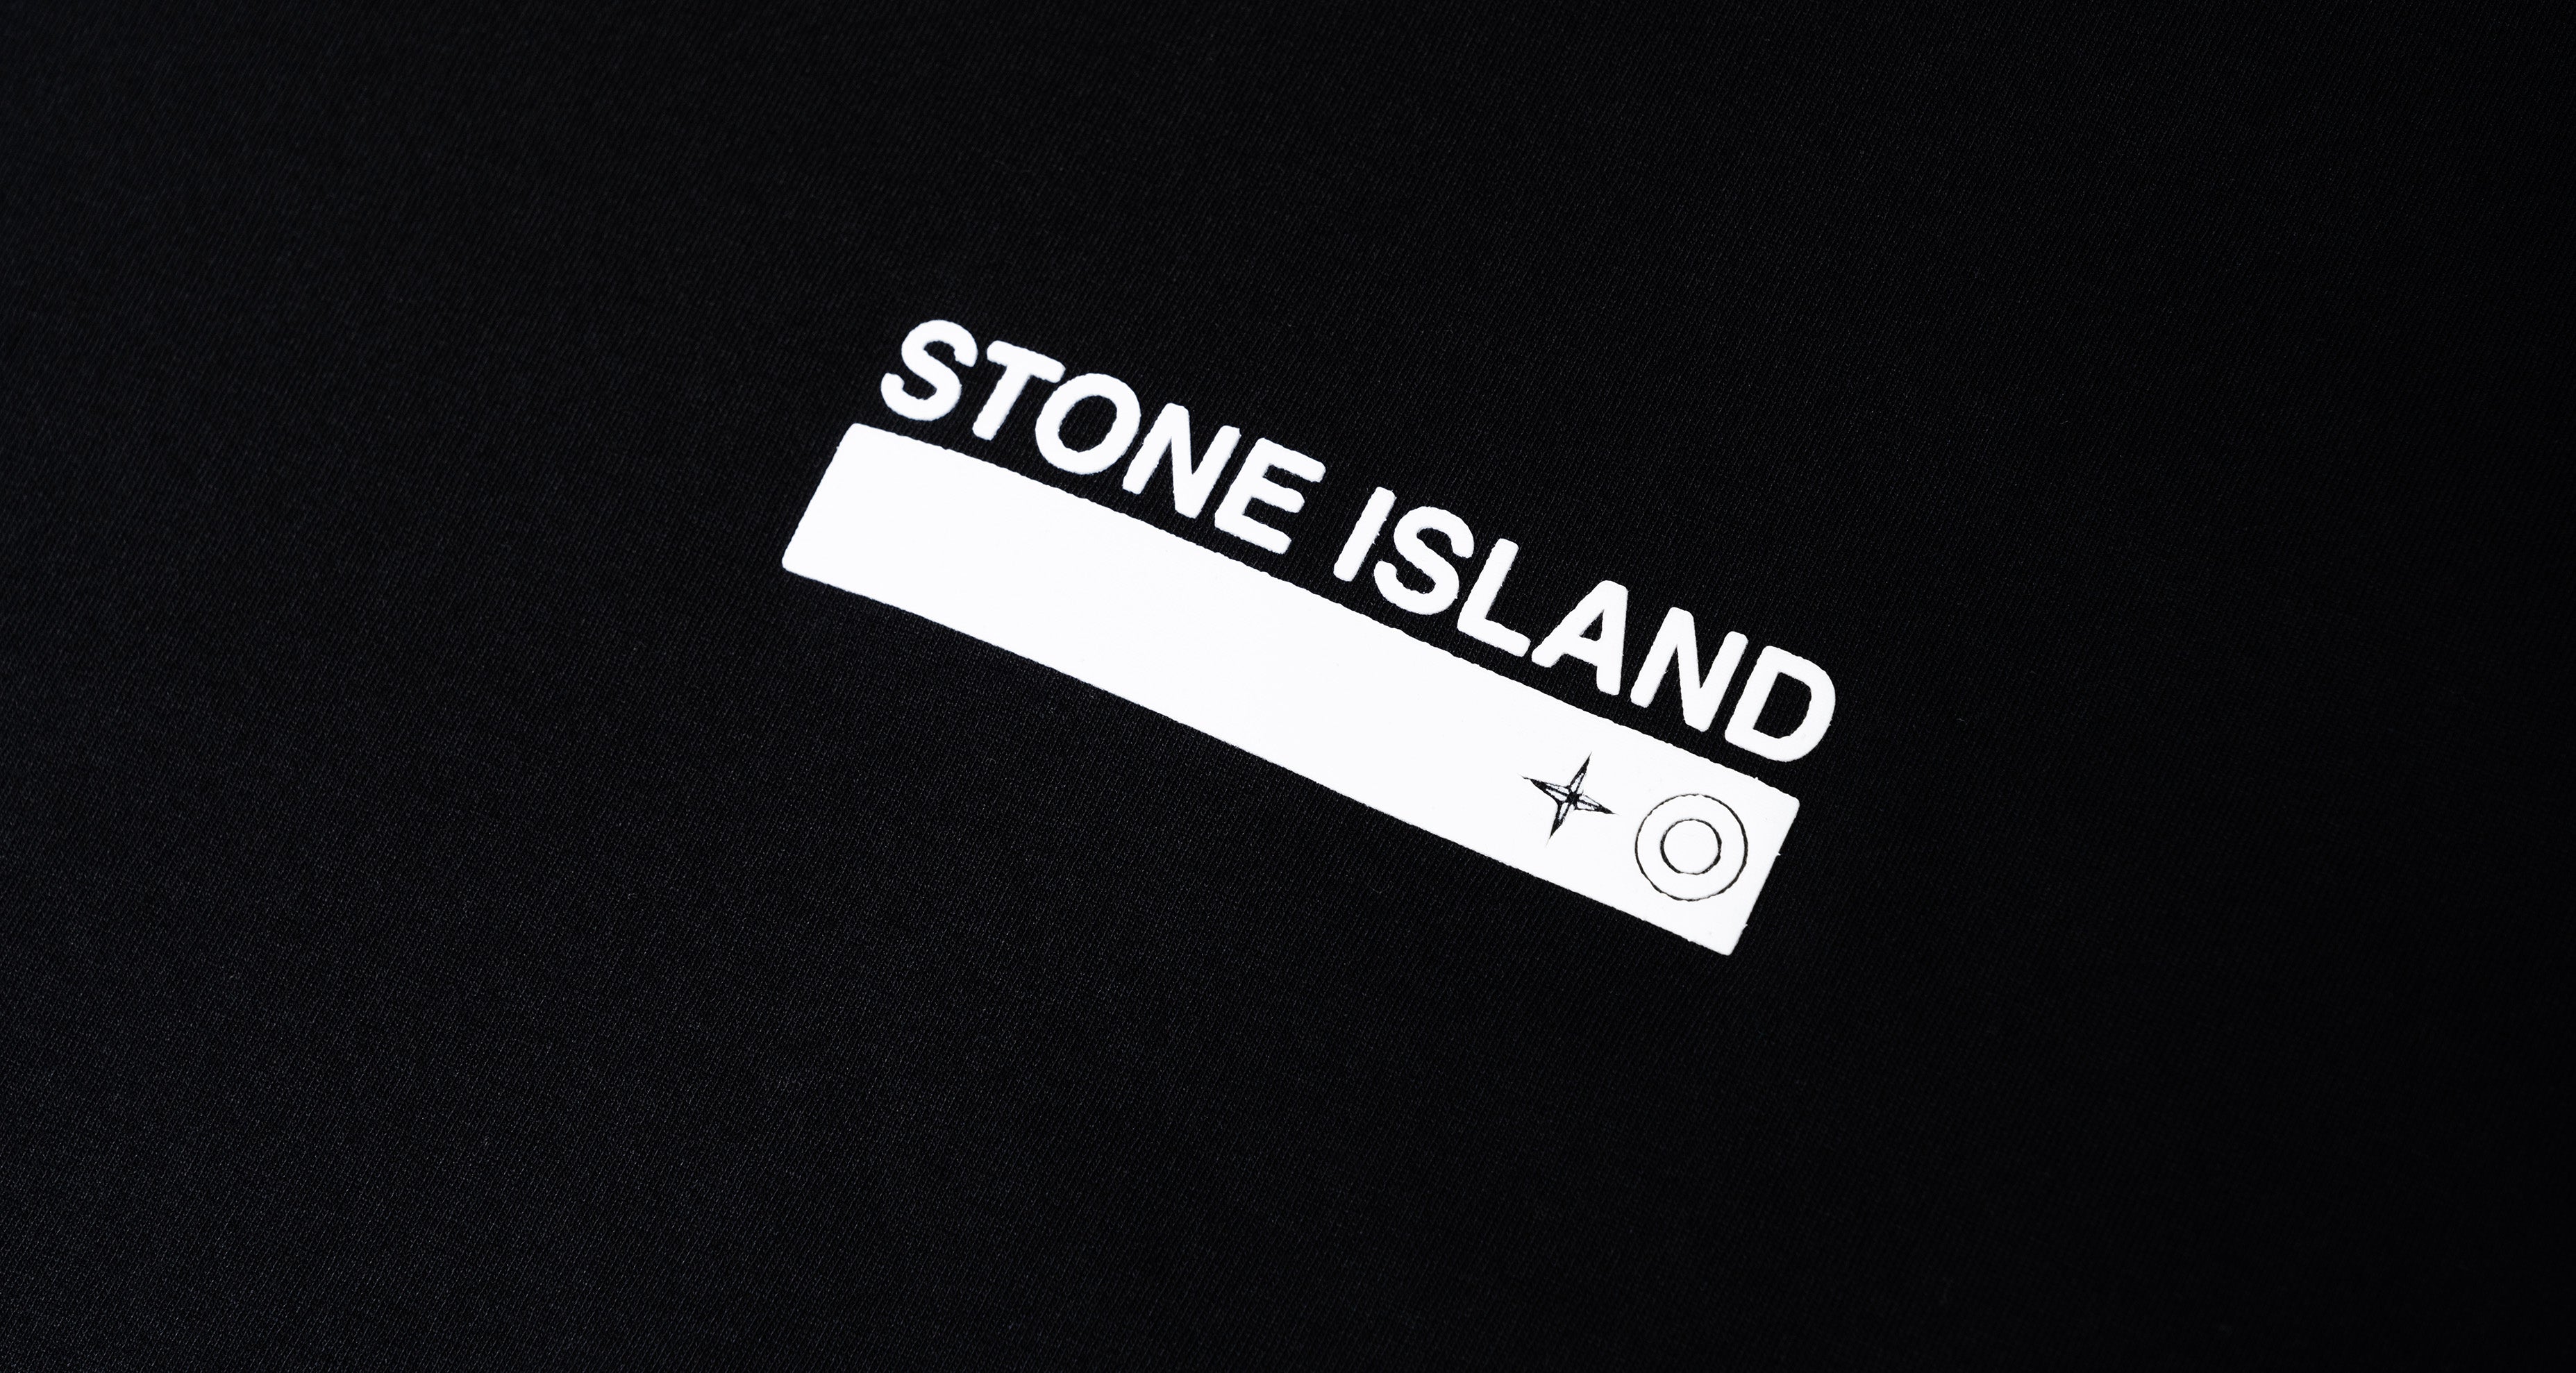 Stone Island is the Trademark for Identification